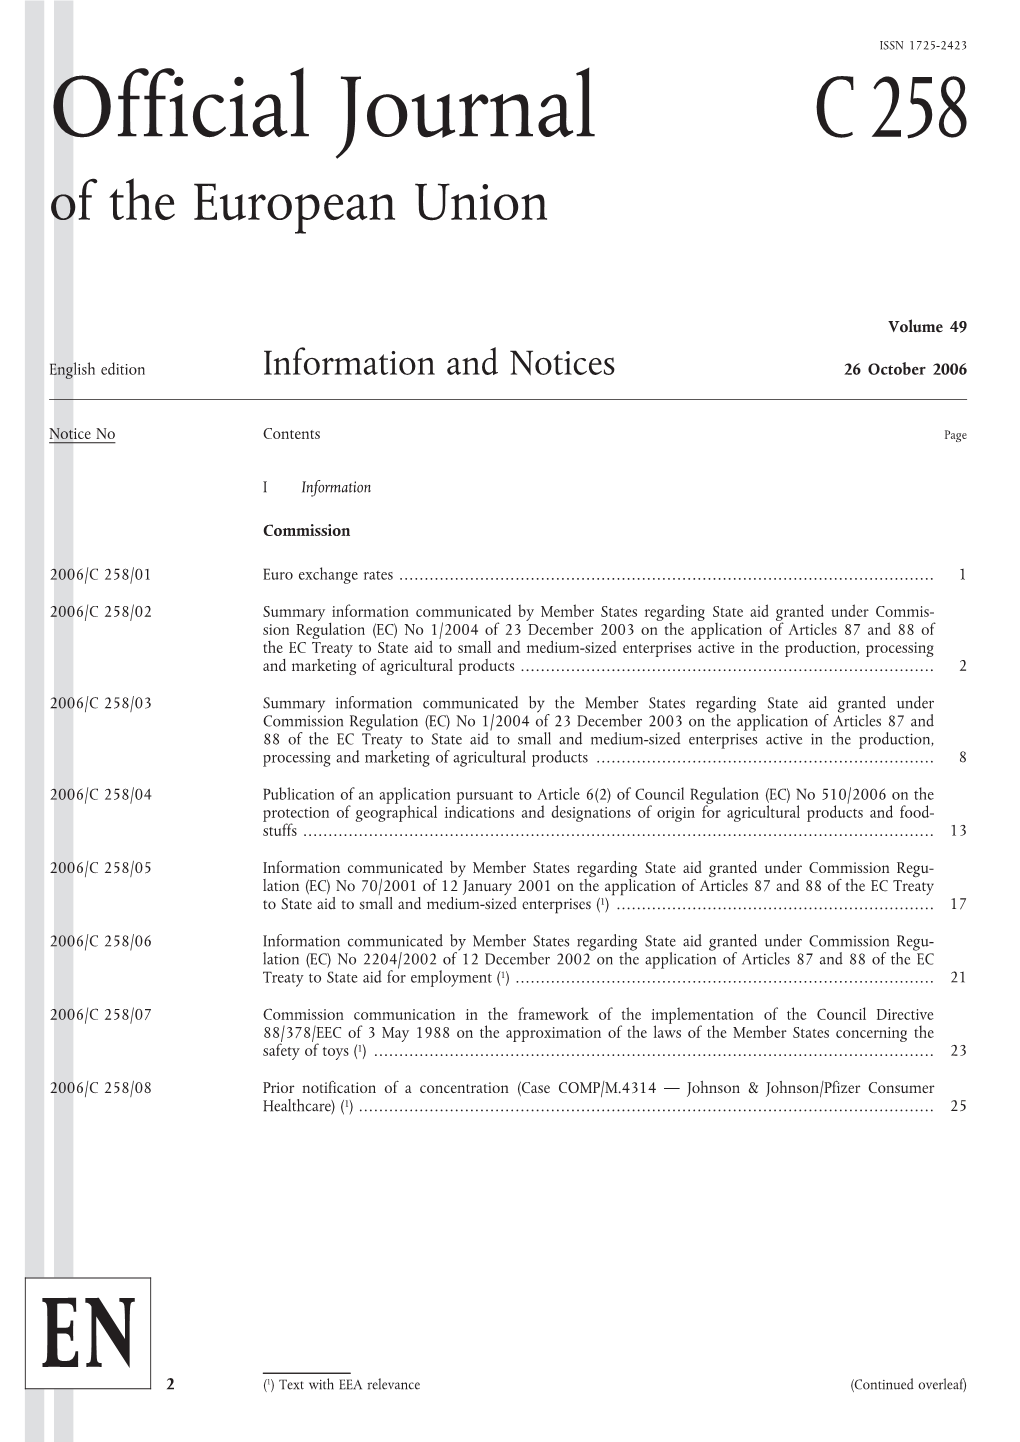 Official Journal C258 of the European Union